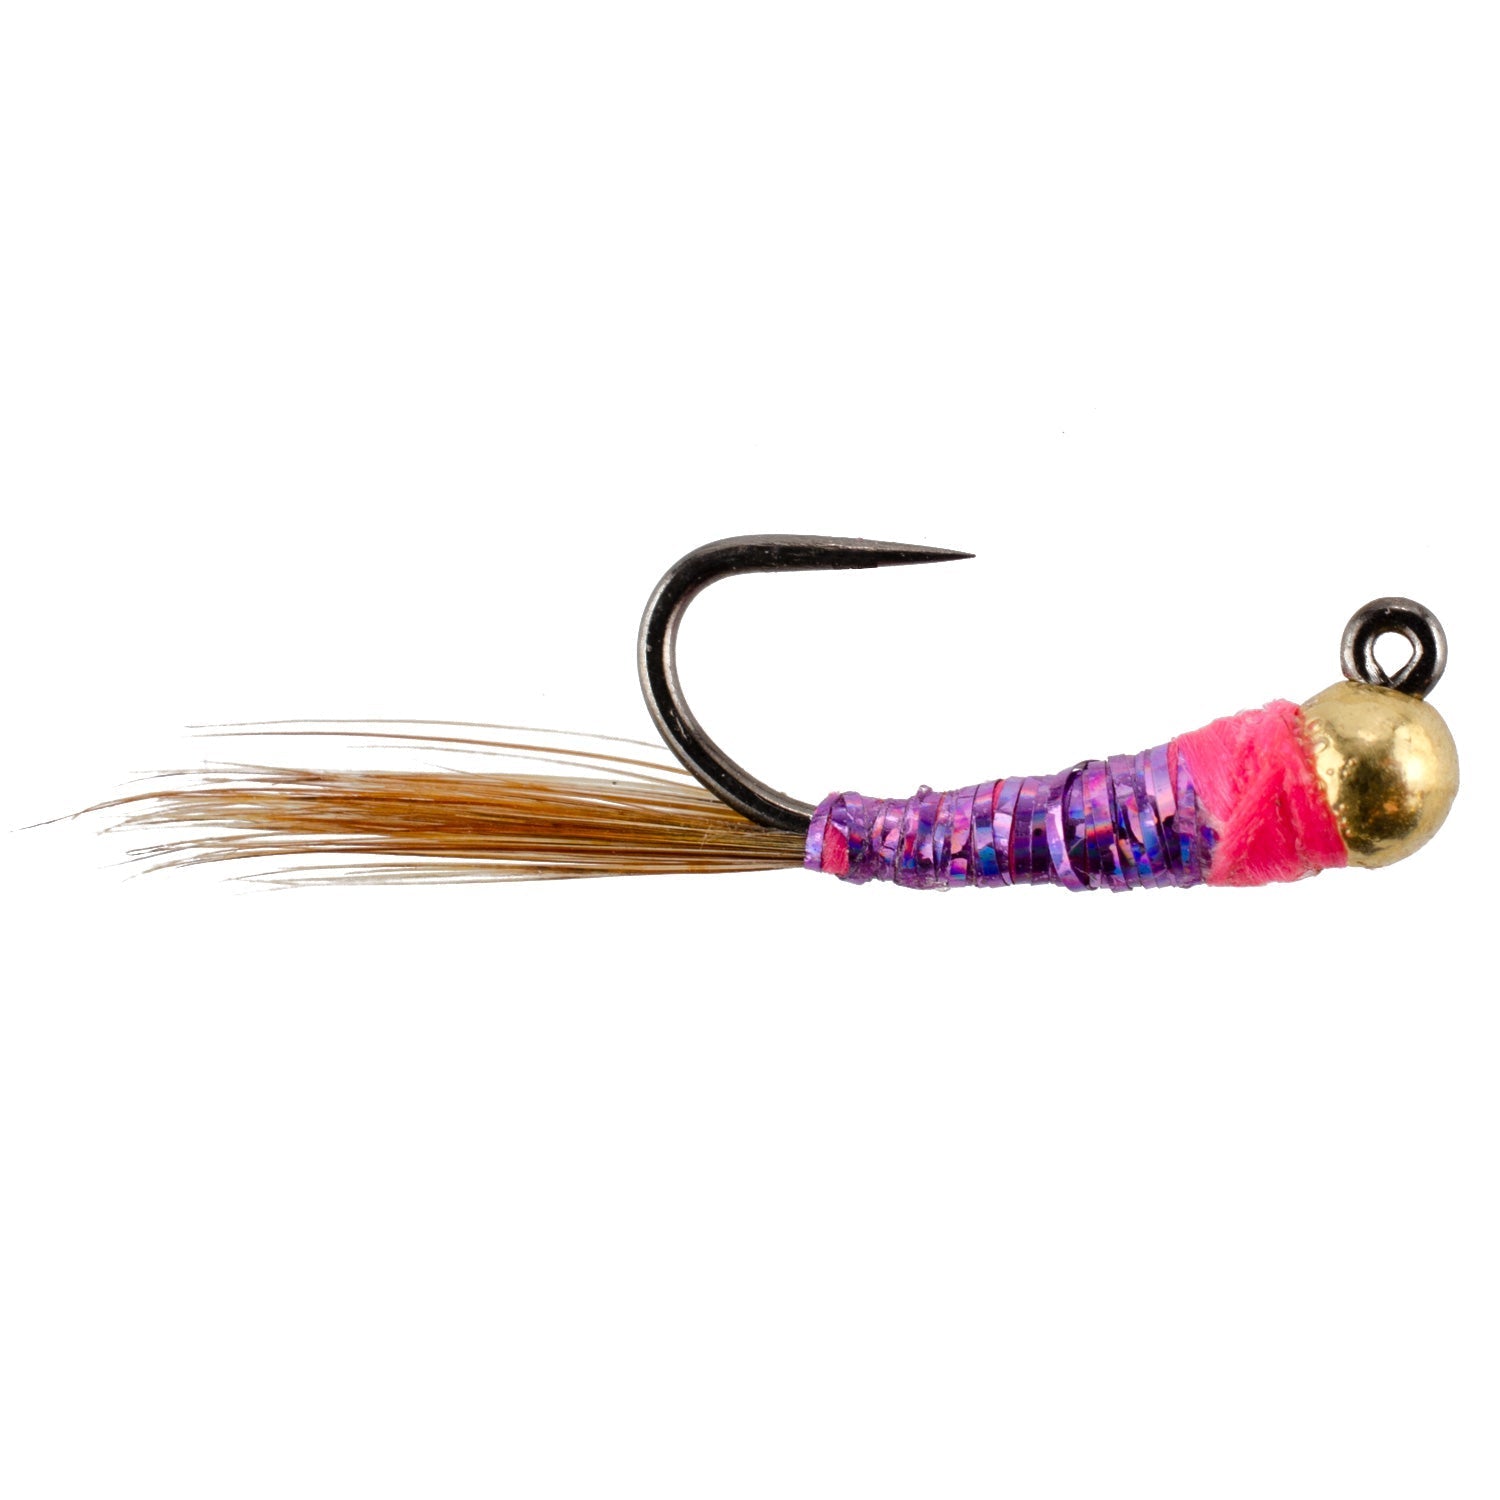 6 Flies – Tungsten Frenchie Jig Head Fly – Euro nymph Fishing